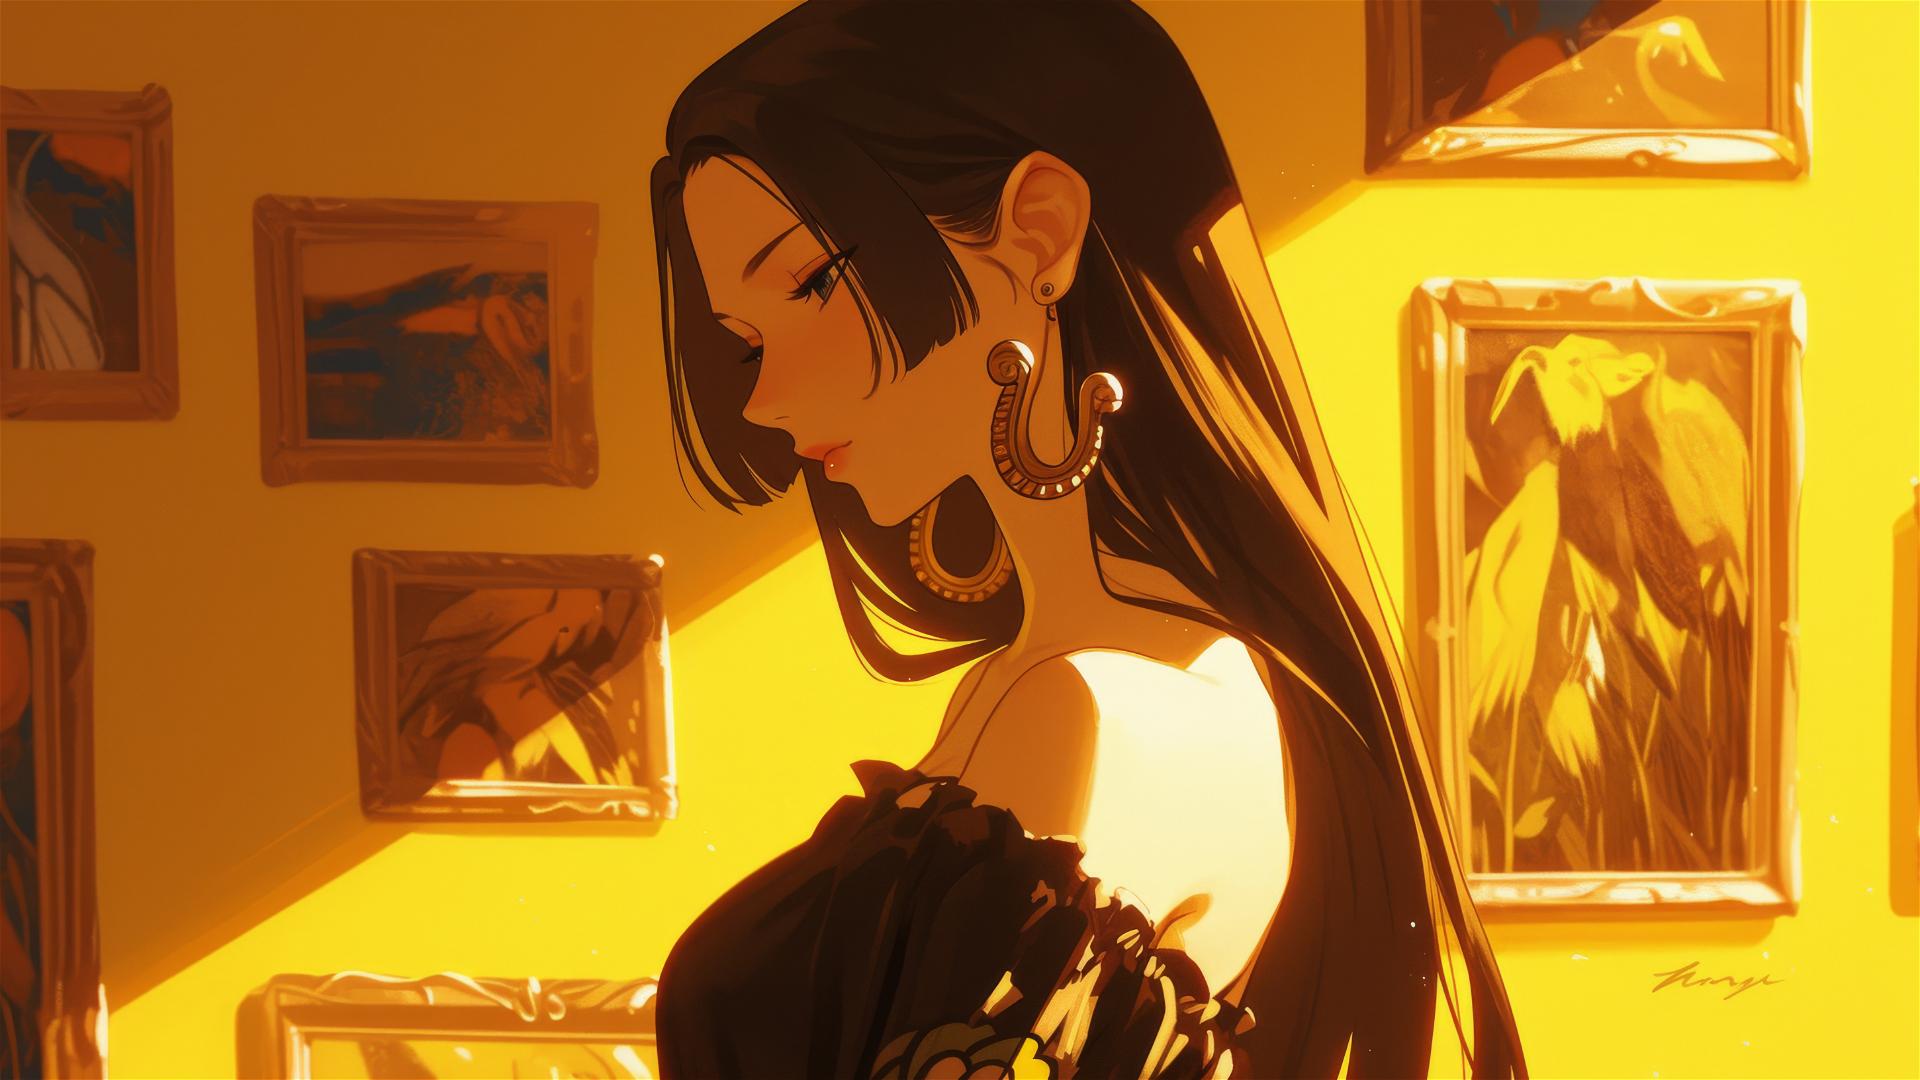 Boa Hancock from One Piece exploring an art gallery under soft lighting